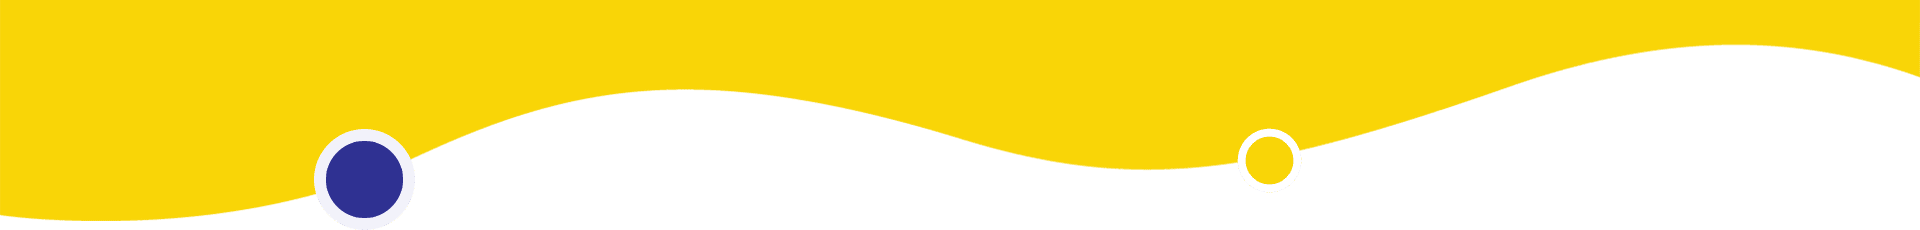 A yellow and black background with stairs going up.